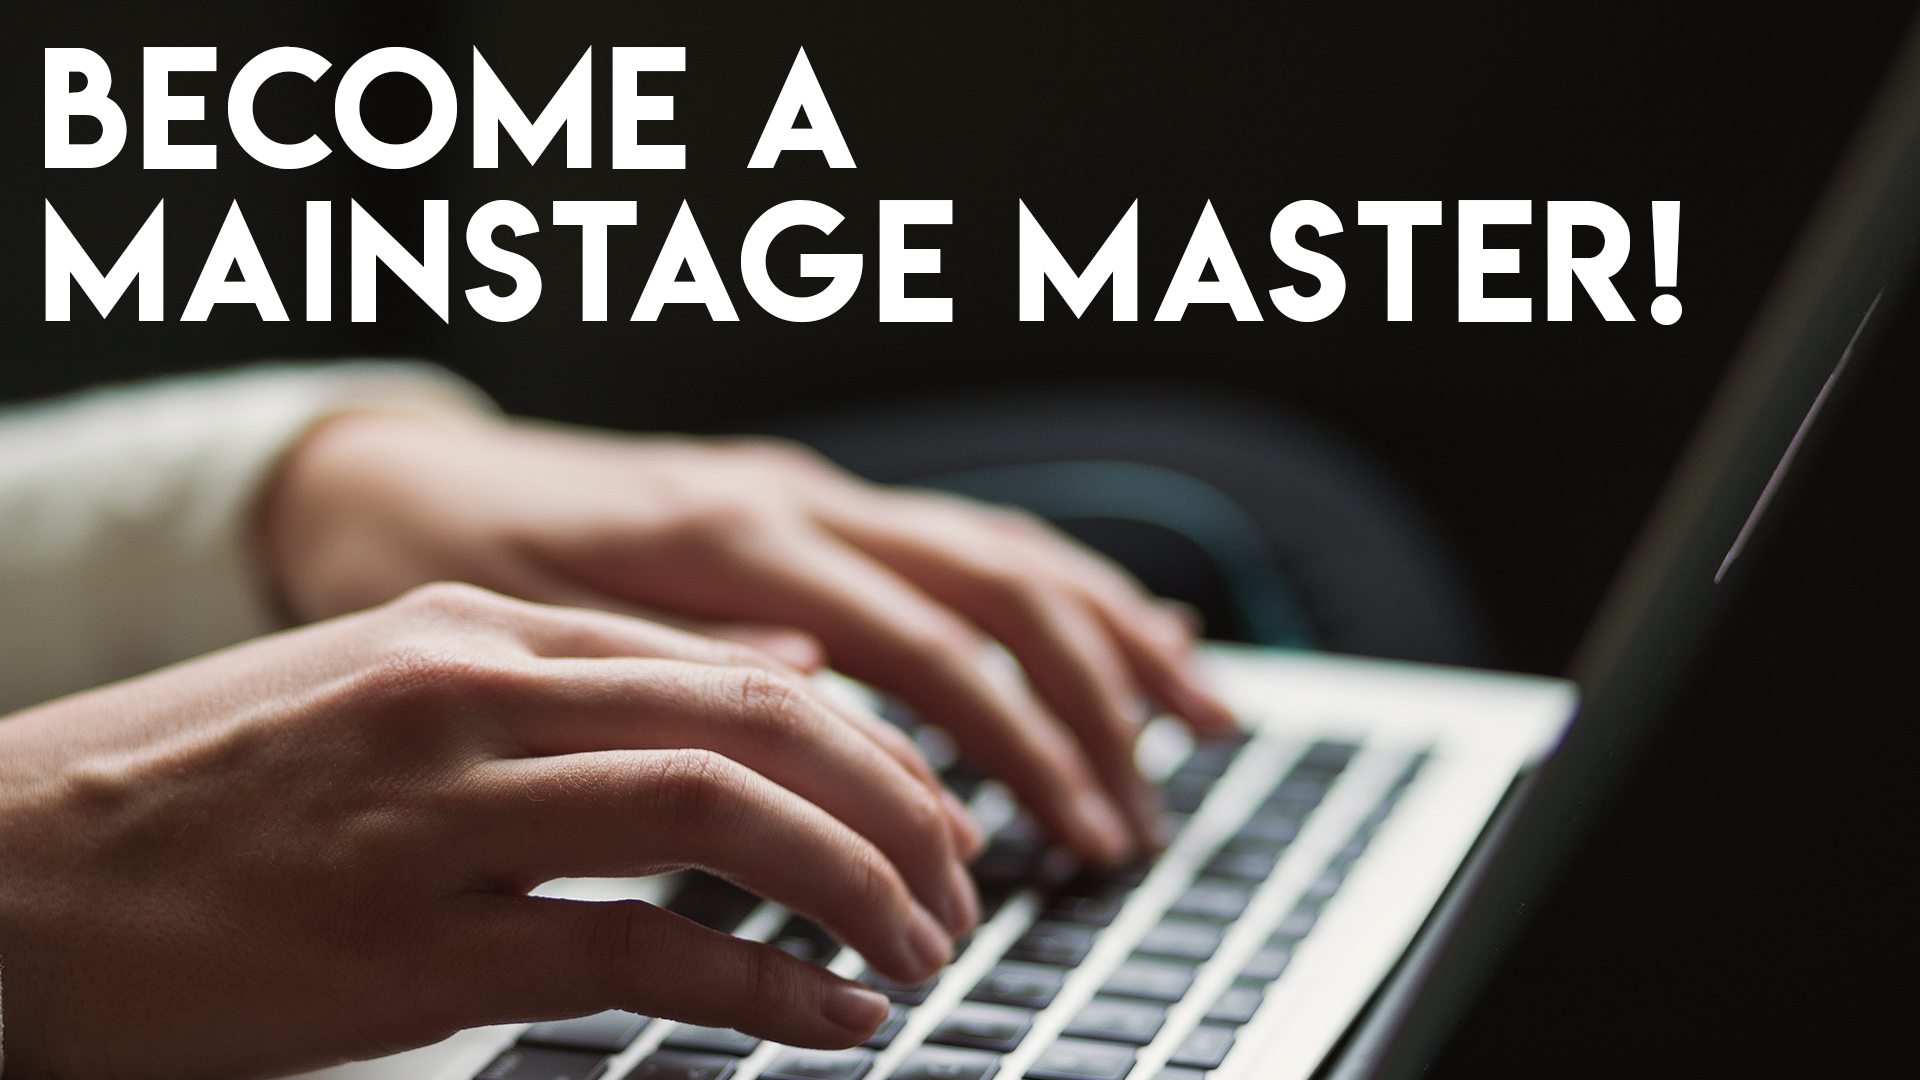 MainStage Mastery Training Course - Become a MainStage Master!